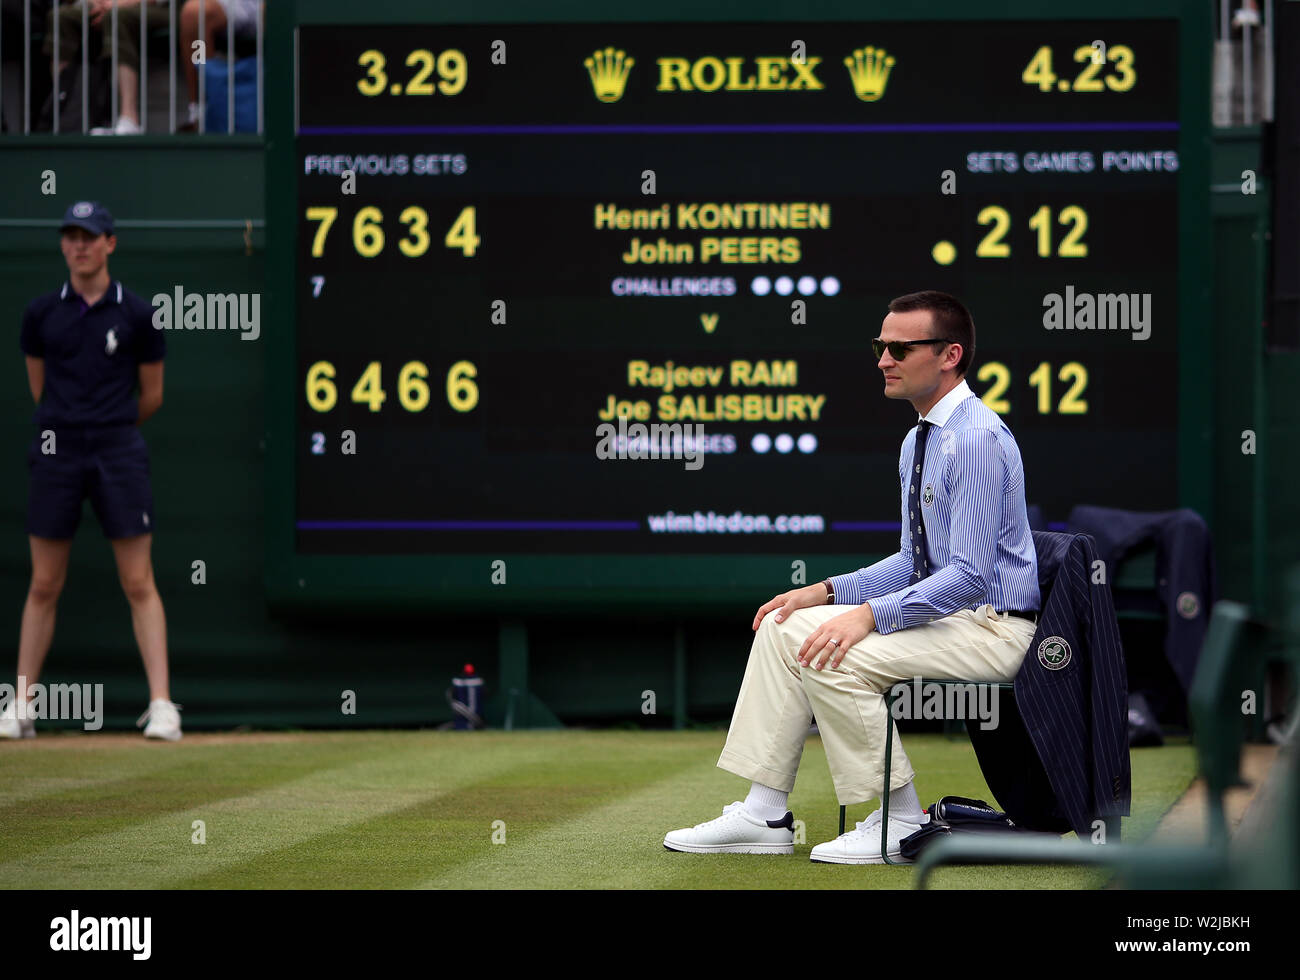 The scoreboard on court twelve displays the fifth set tie break for the  John Peers and Henri Kontinen against Joe Salisbury and Rajeev Ram mens  doubles match on day eight of the